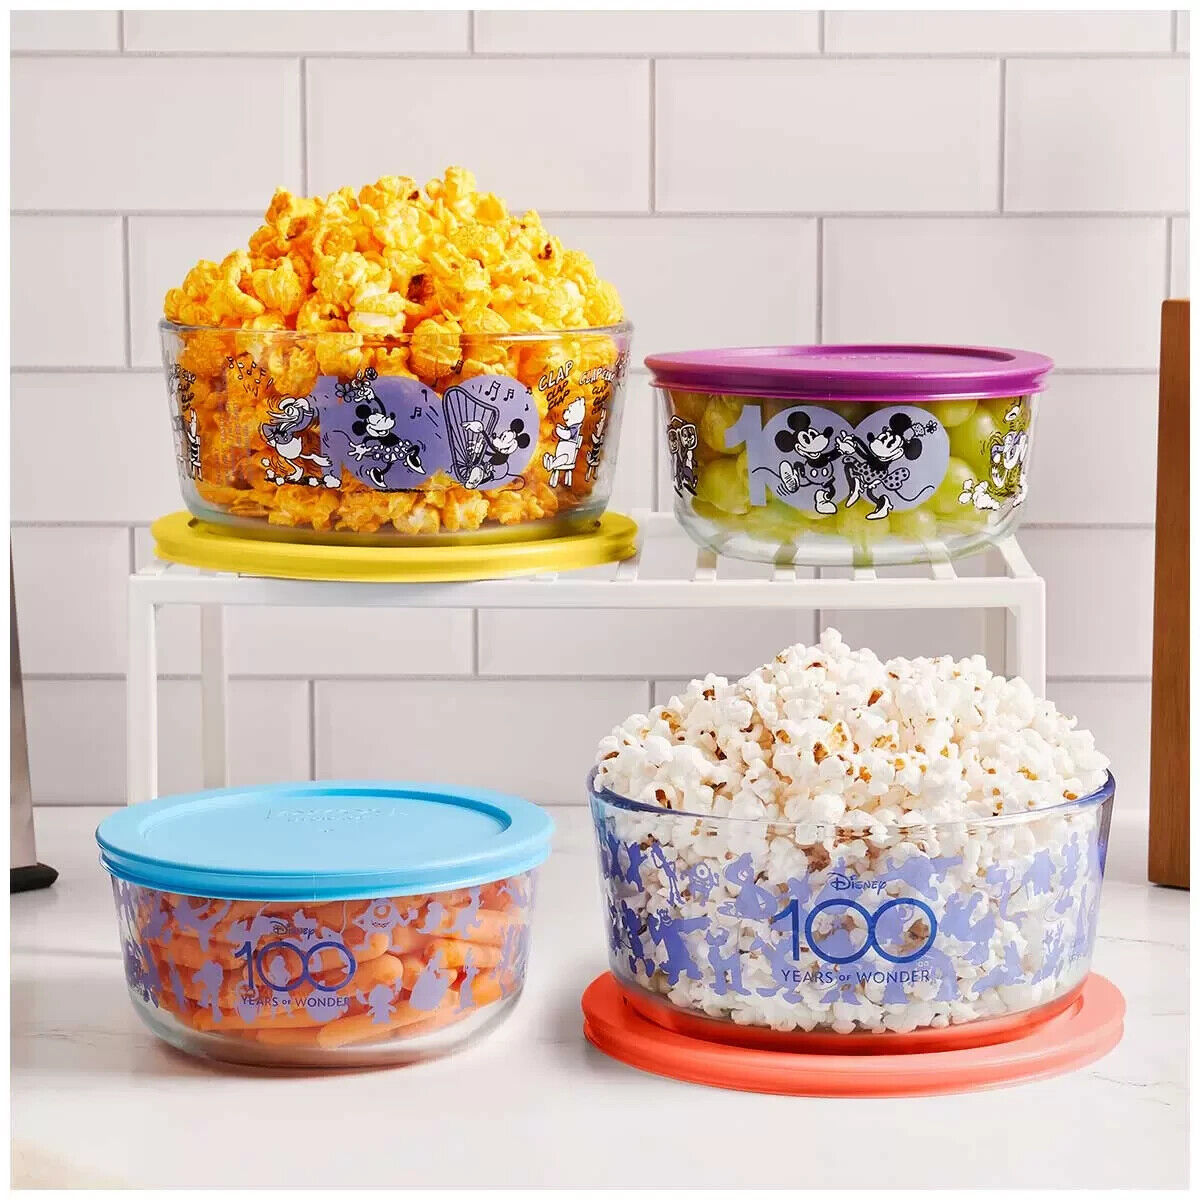 Pyrex Disney 100th Anniversary Glass Food Storage Snack Container 8pcs  Bowls Set